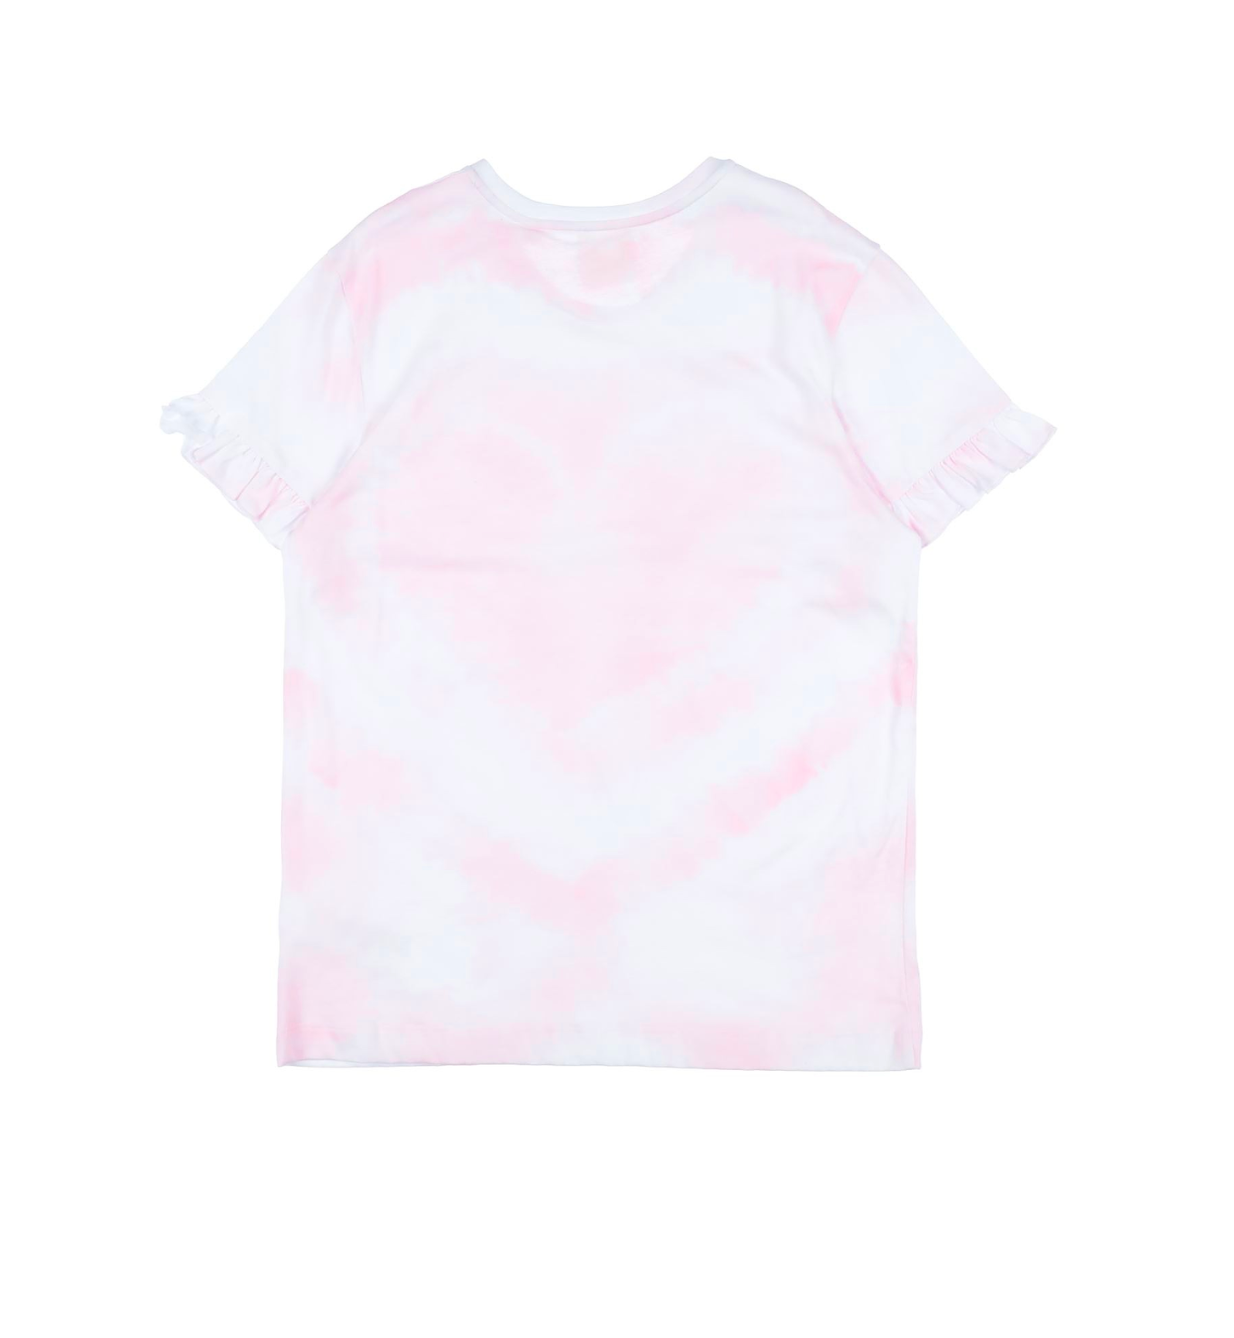 GIVENCHY - Pink tie-dye T-shirt - 6 years old